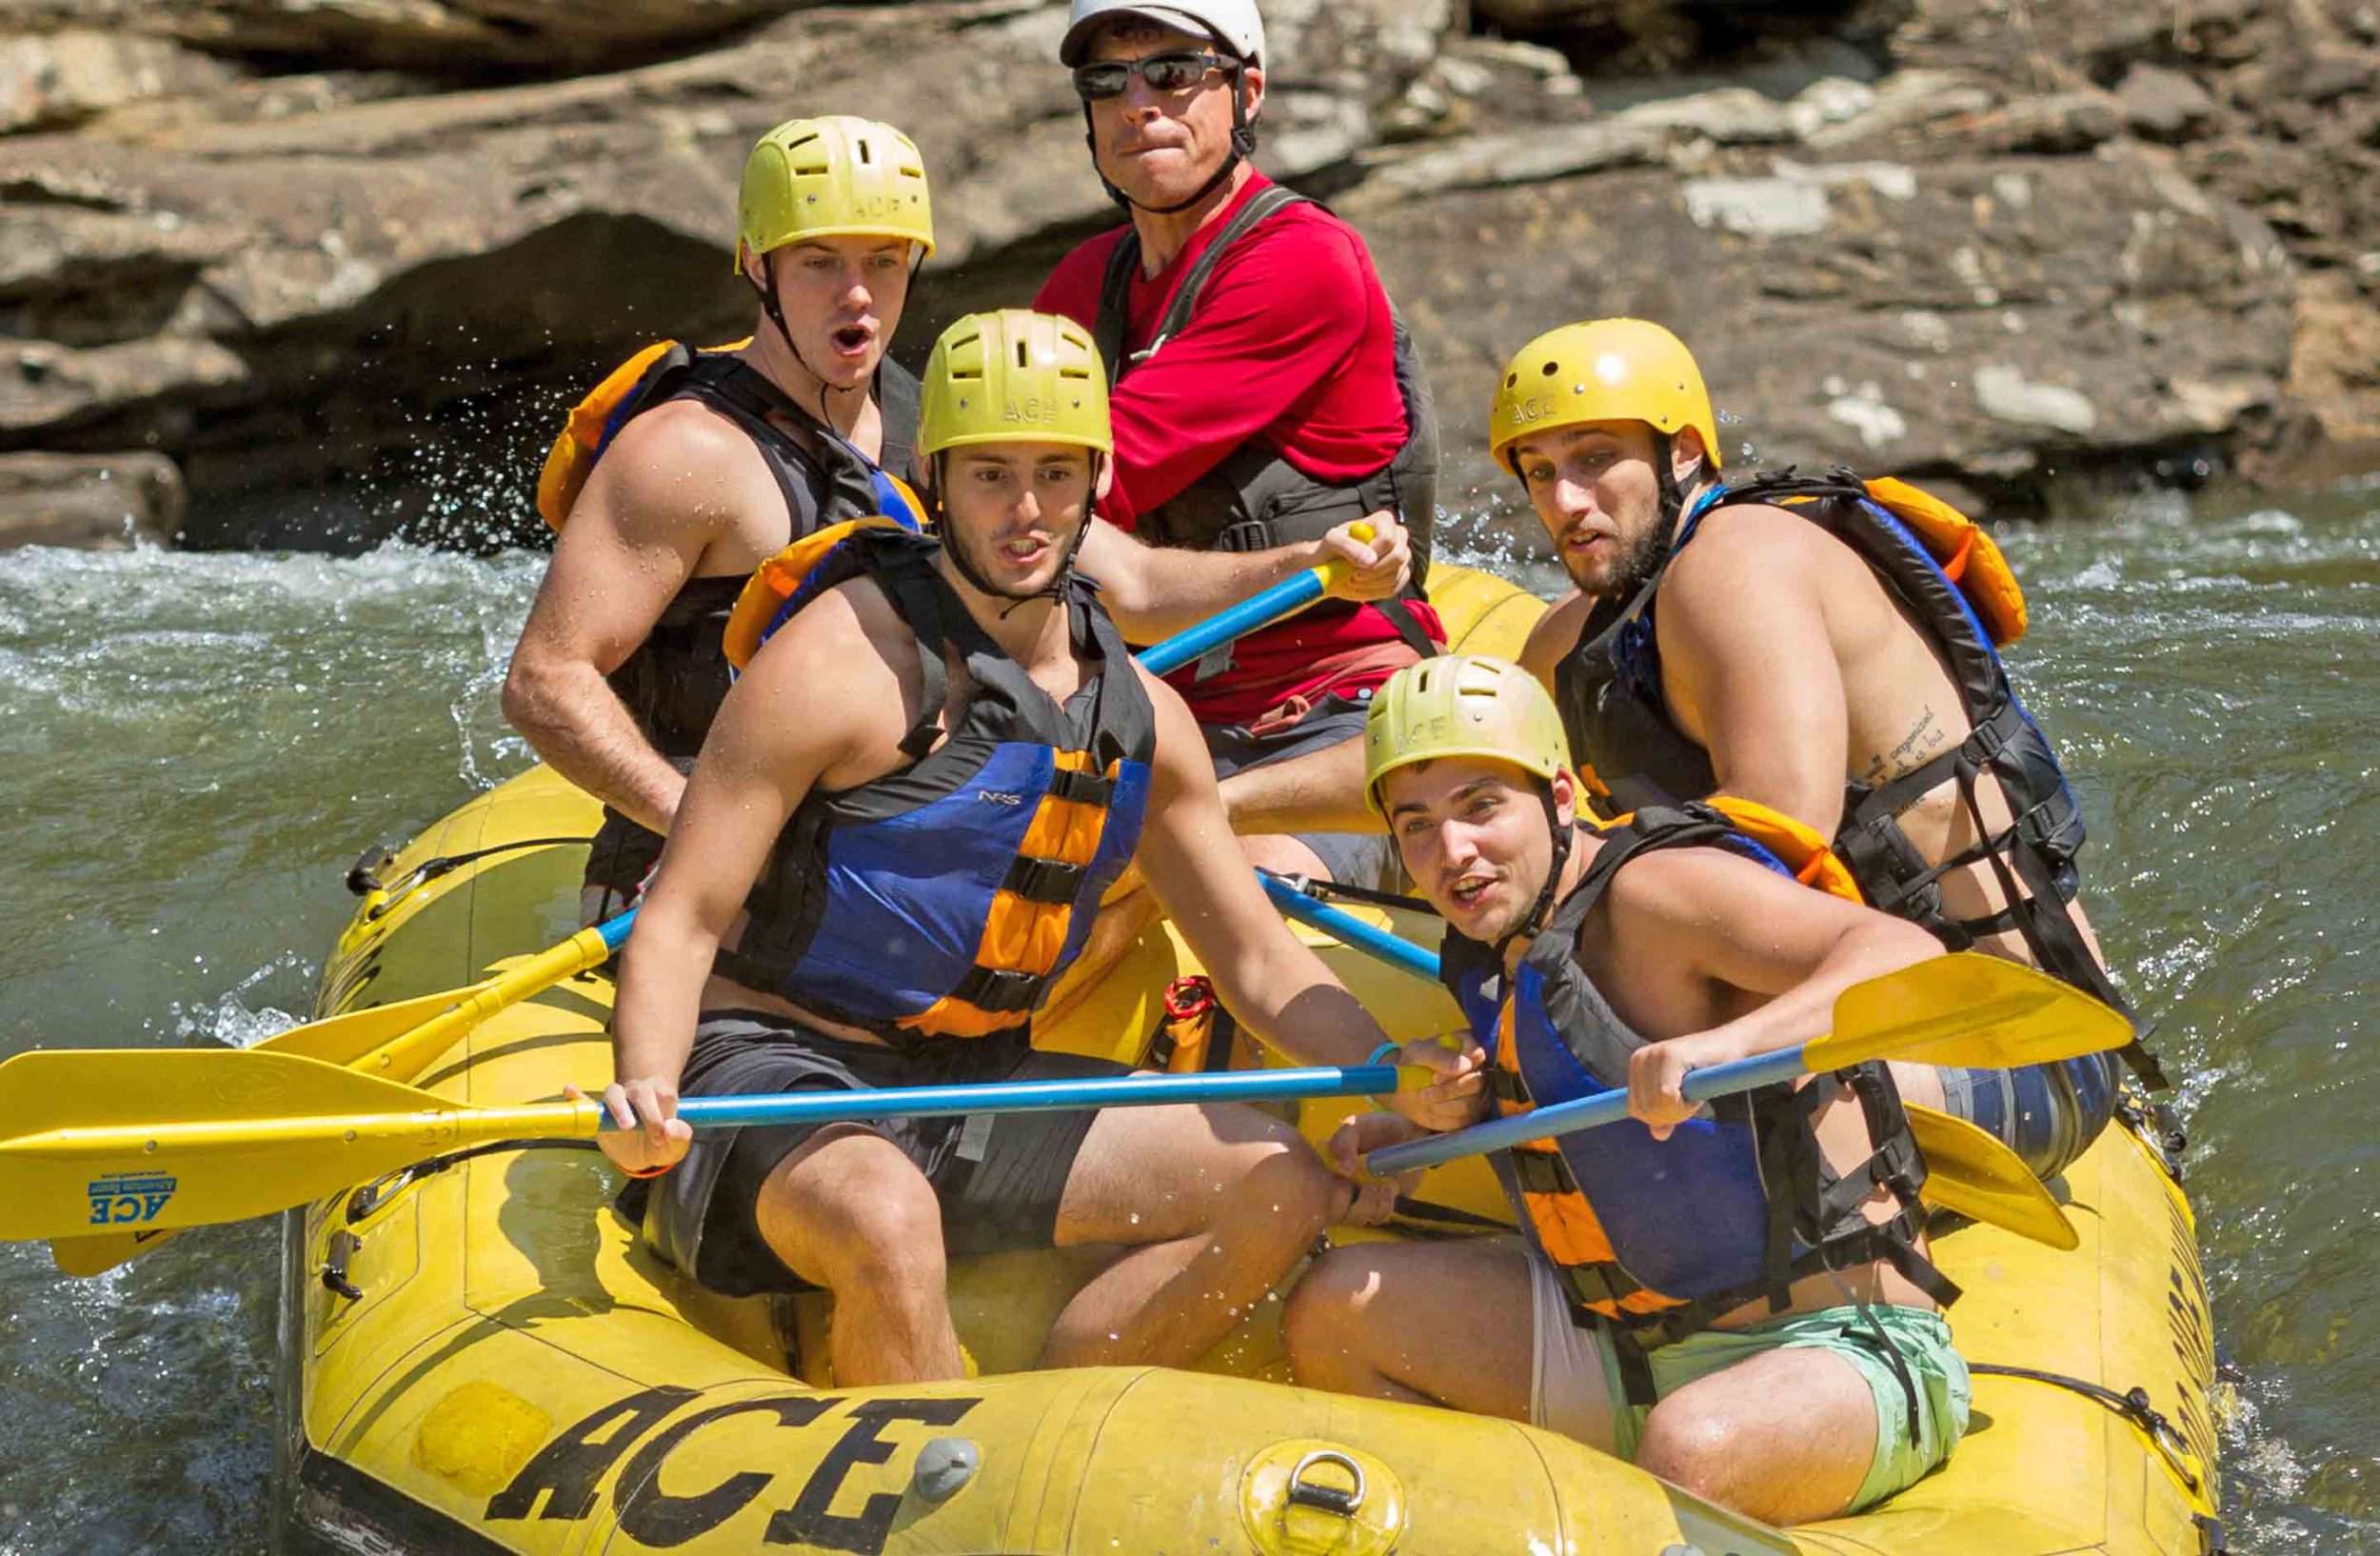 About Raft Types And The Types Of Rafts We Use - ACE Adventure Resort